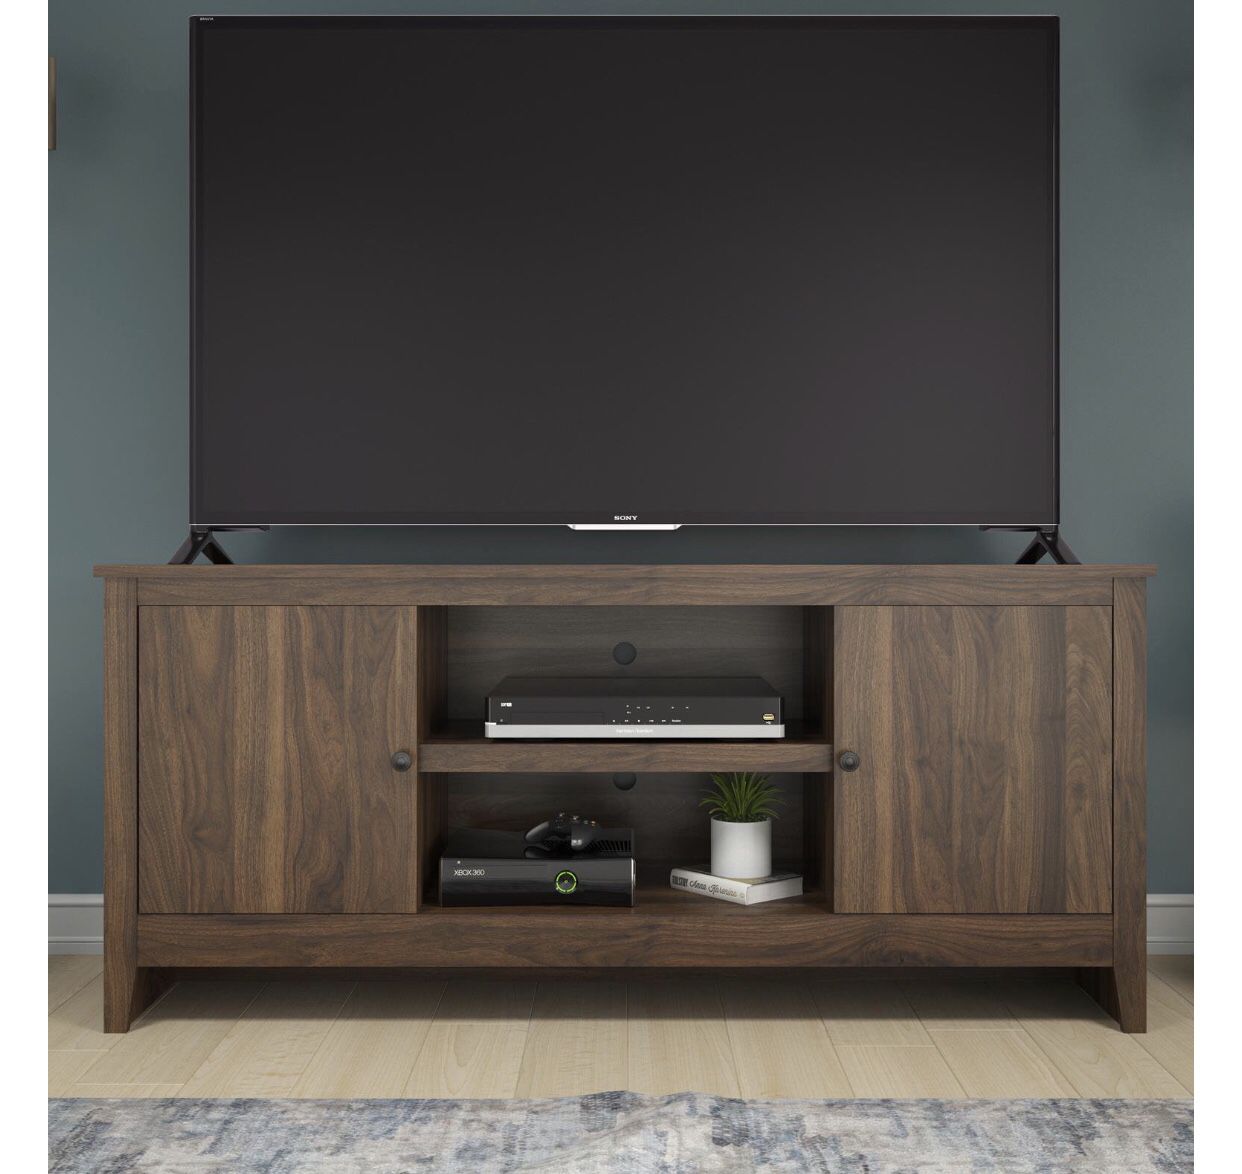 Stand for tv 65 inches 2 door media console